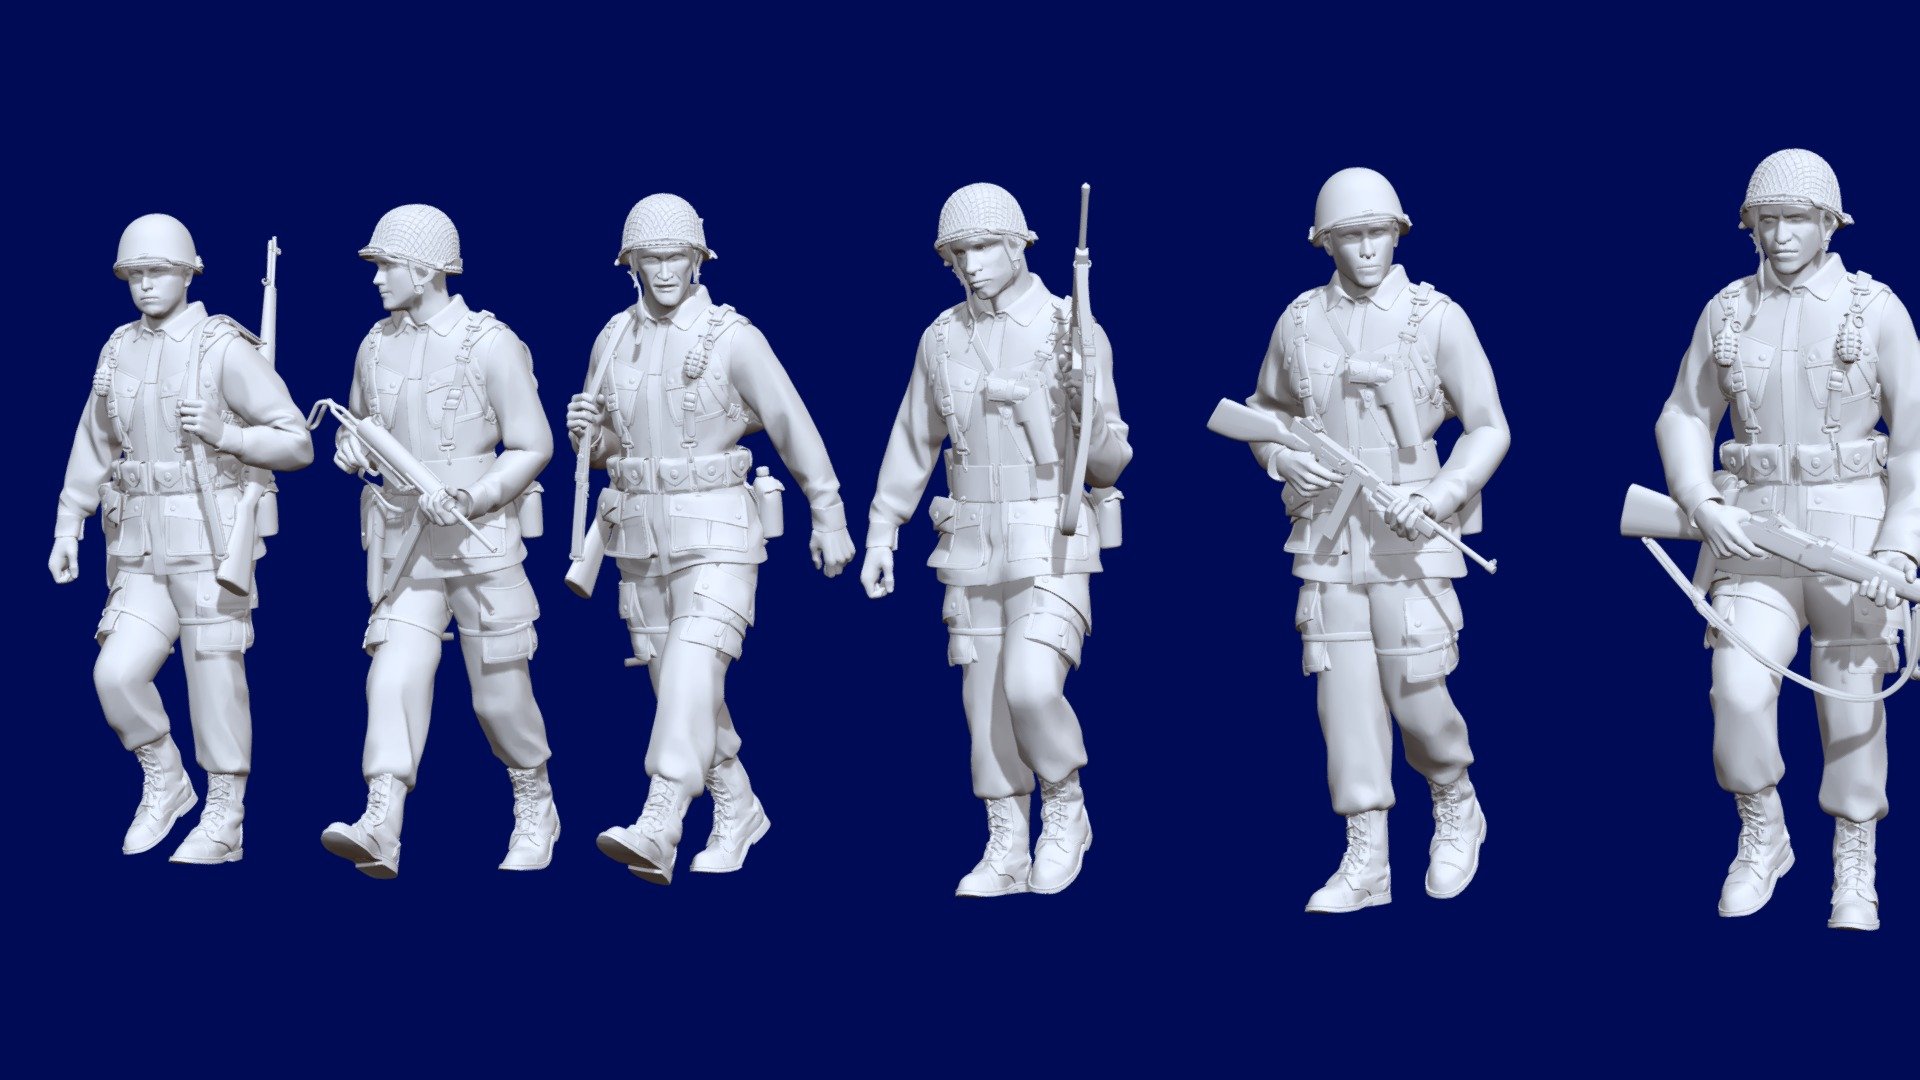 American soldiers ww2
The format is OBJ, STL, Zbrush. Model for printing on a 3d printer 3d model